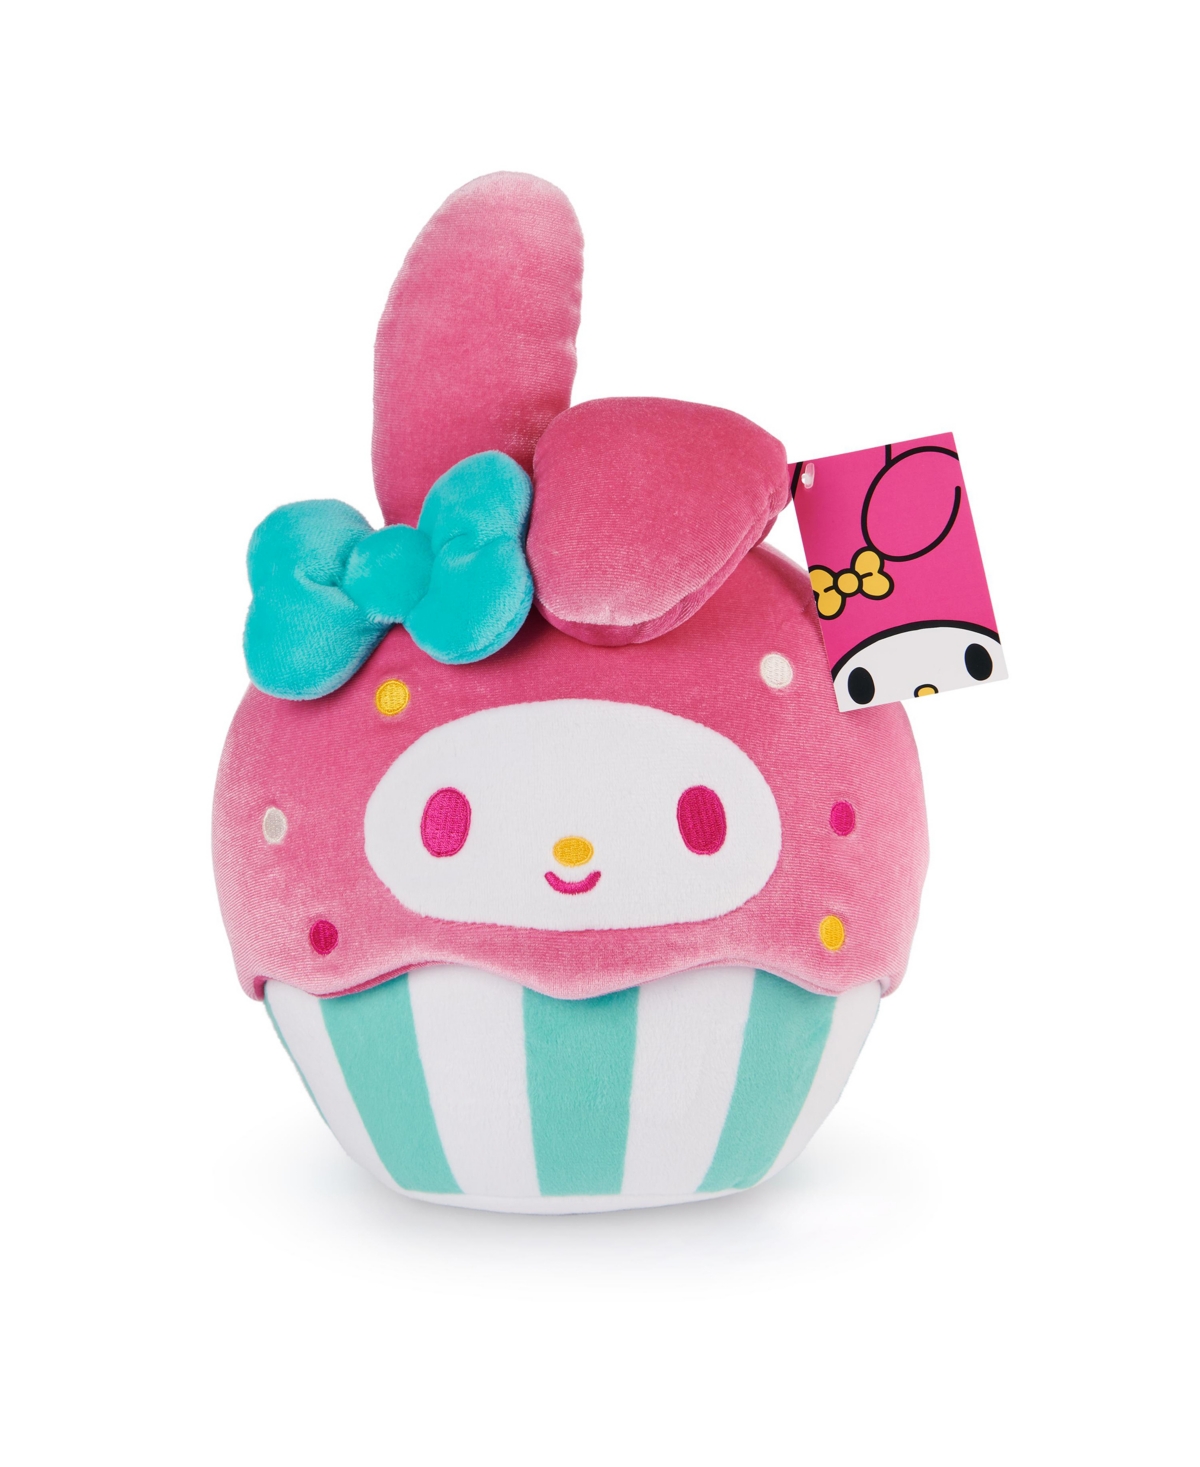 Hello Kitty Gund Sanrio  And Friends My Melody Cupcake Plush, Stuffed Animal, For Ages 3 And Up, 8.5" In Multi-color